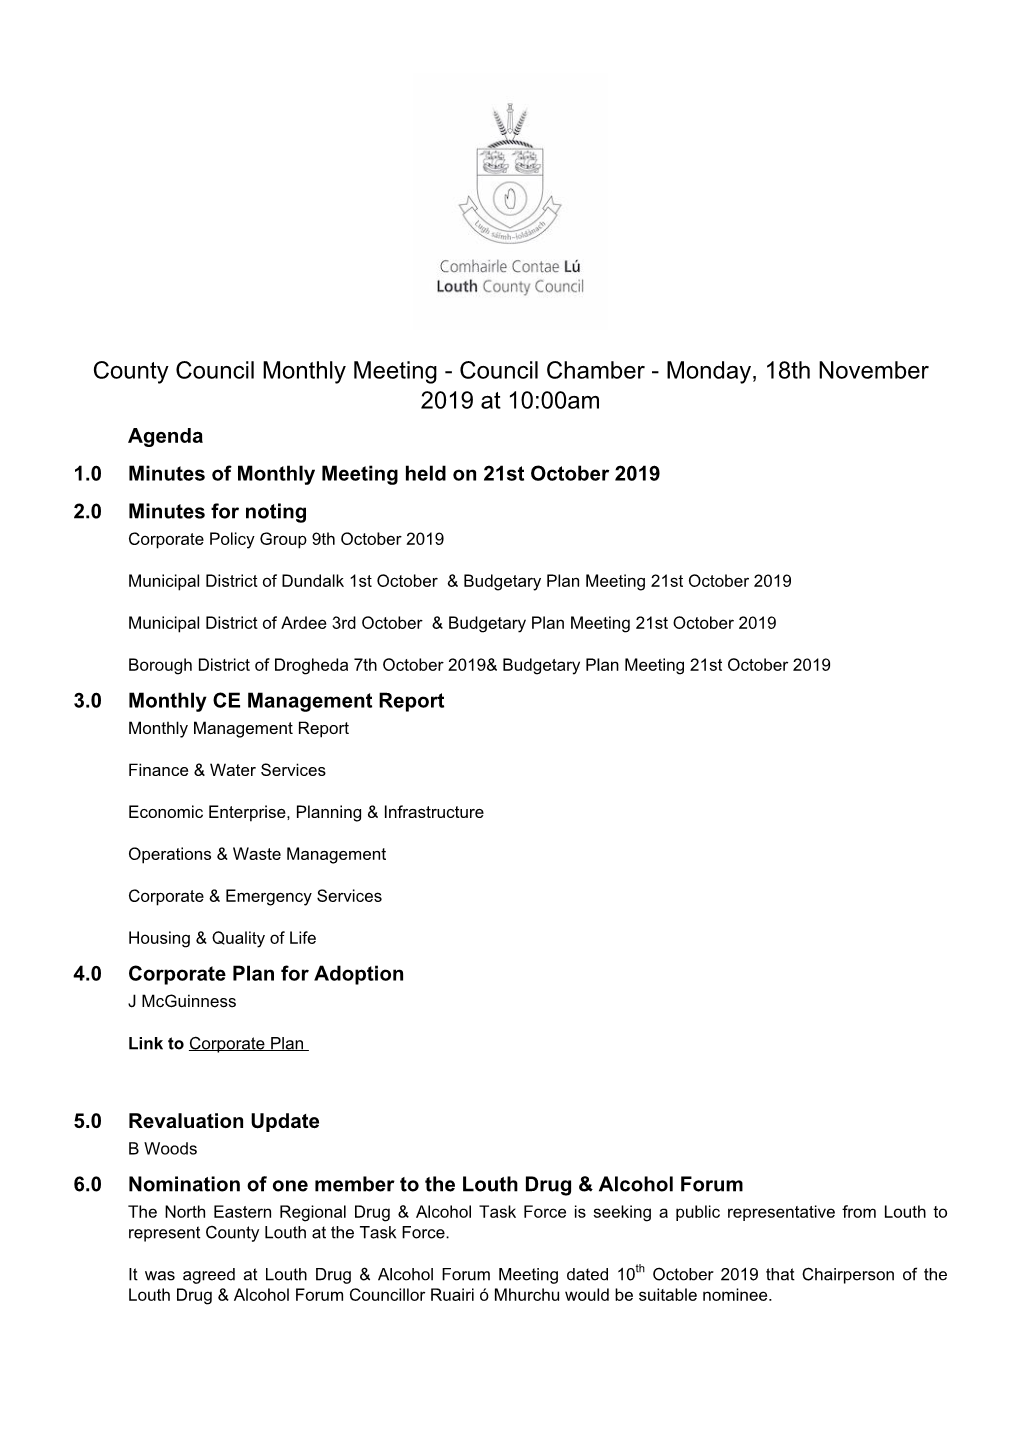 County Council Monthly Meeting (18/11/2019)